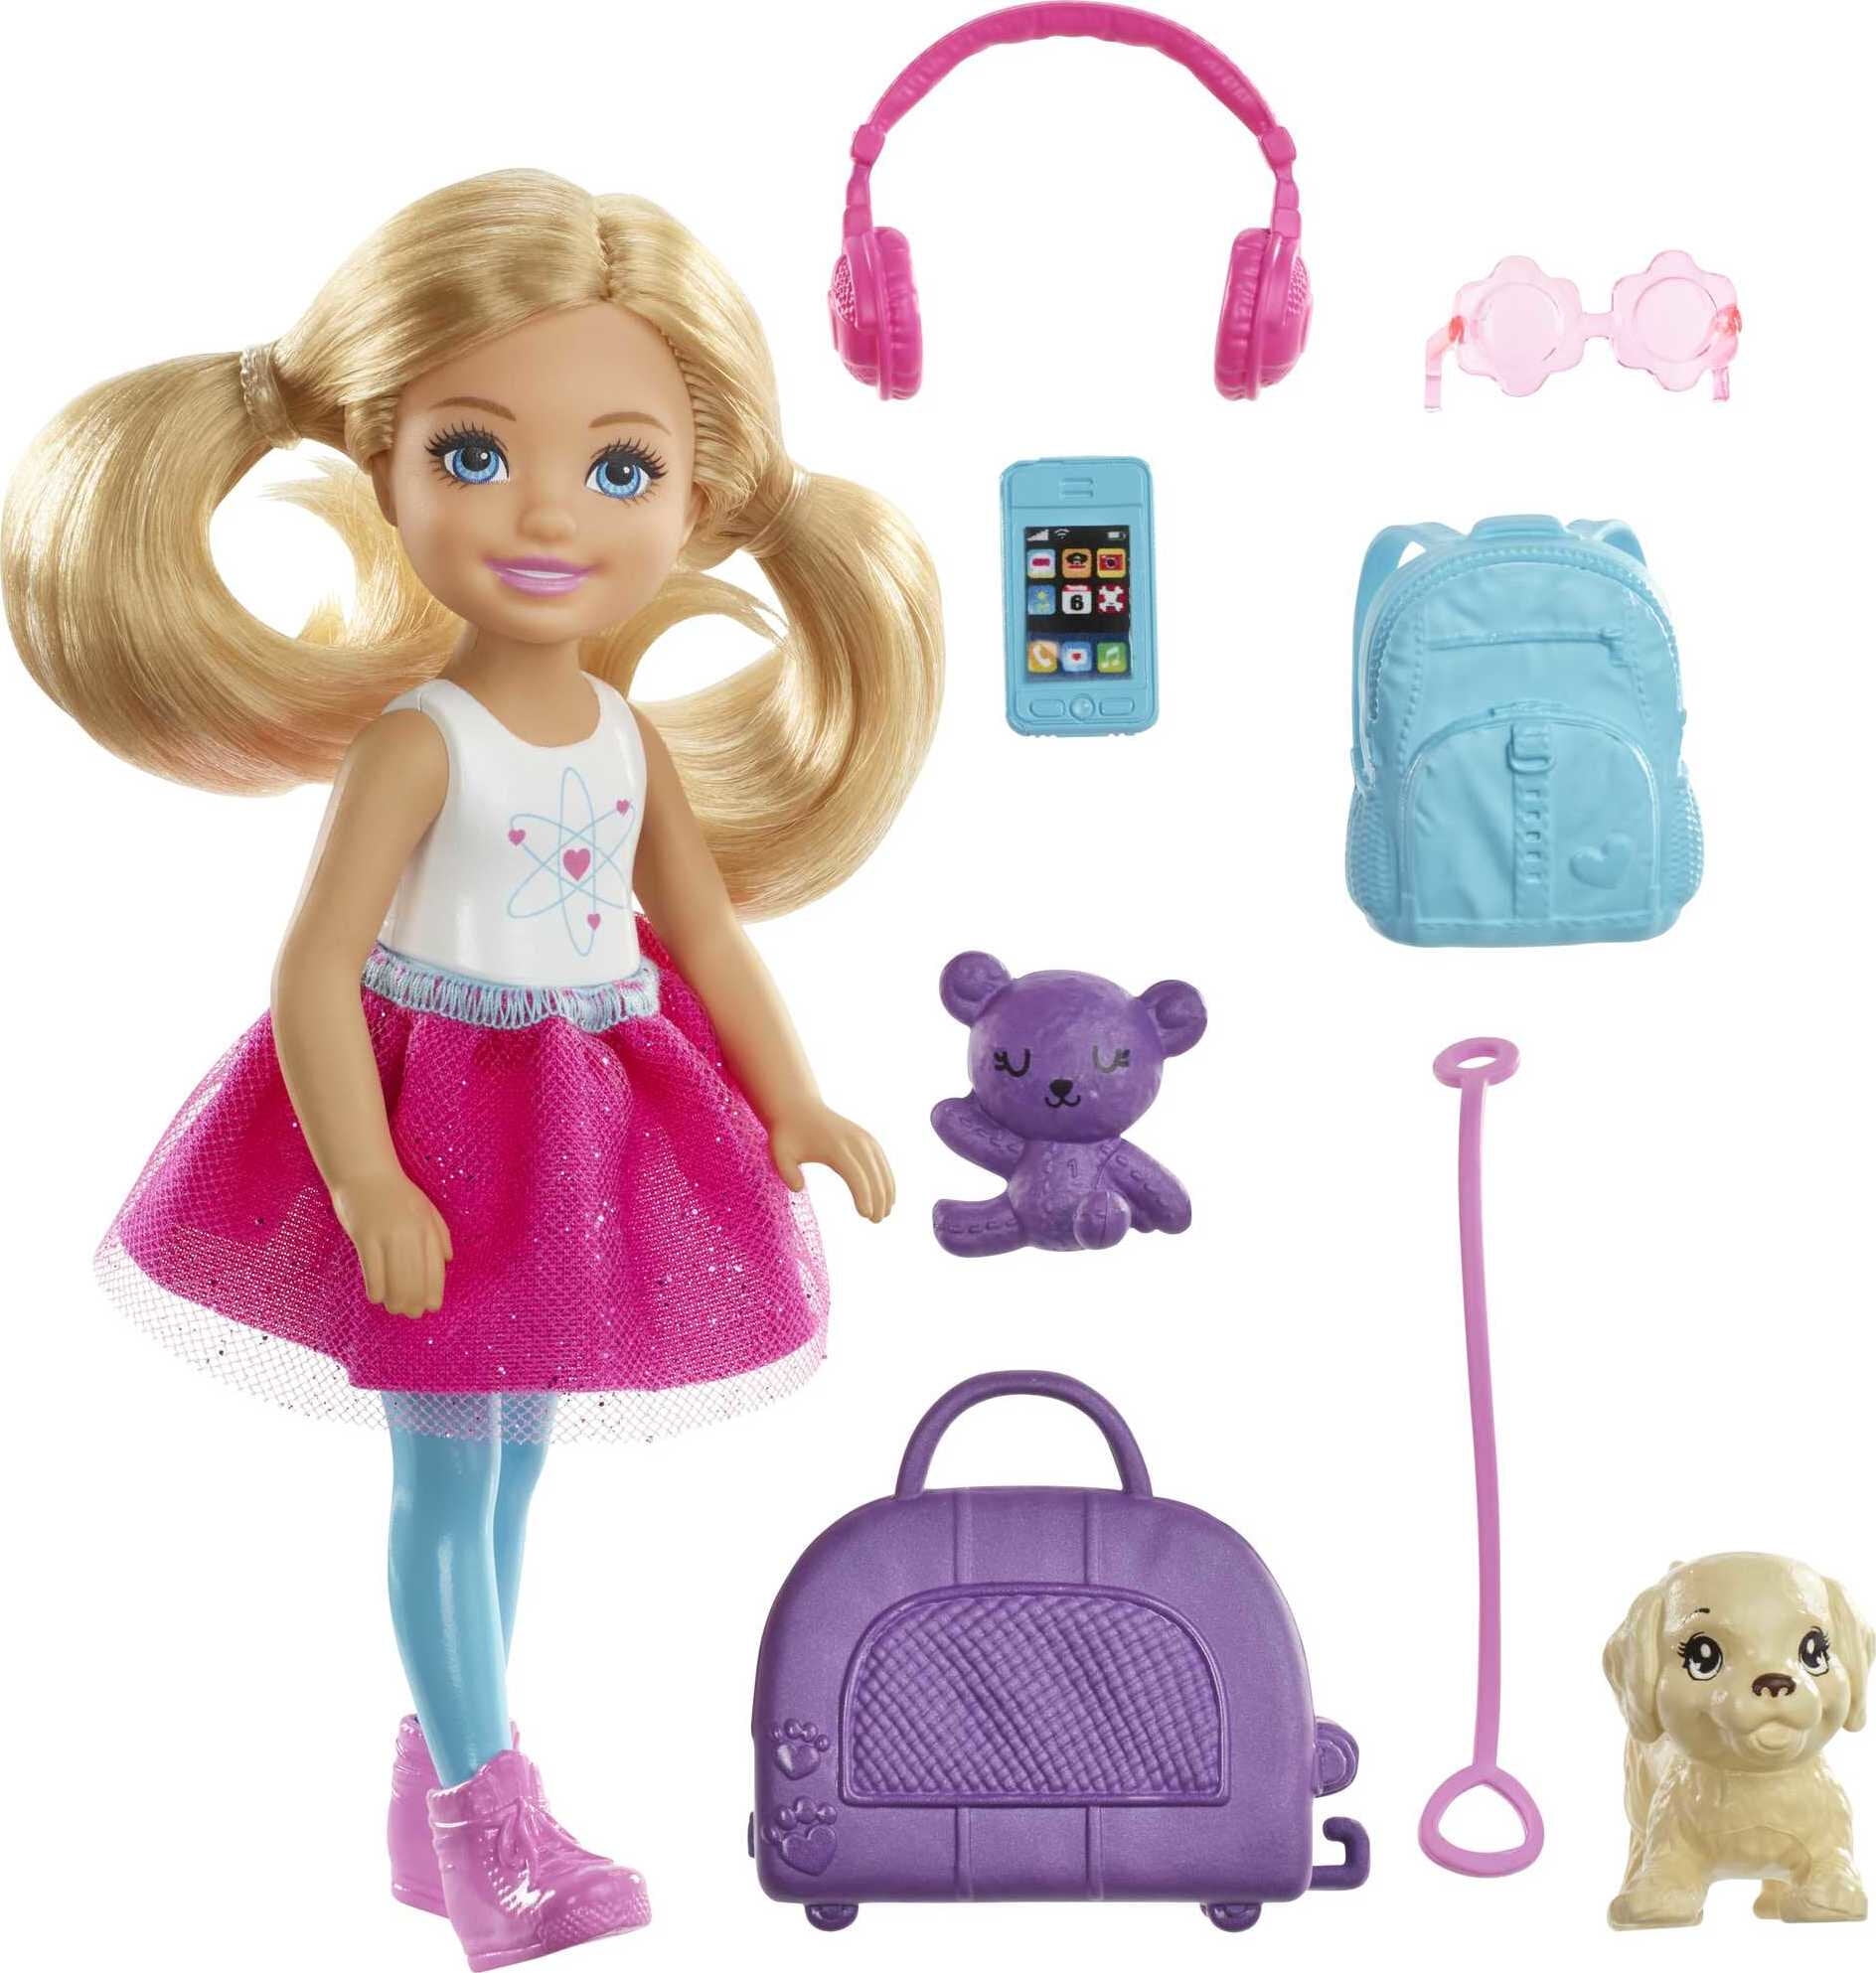 Barbie Chelsea Travel Doll, Blonde, with Puppy, Carrier & Accessories, for 3 to 7 Year Olds